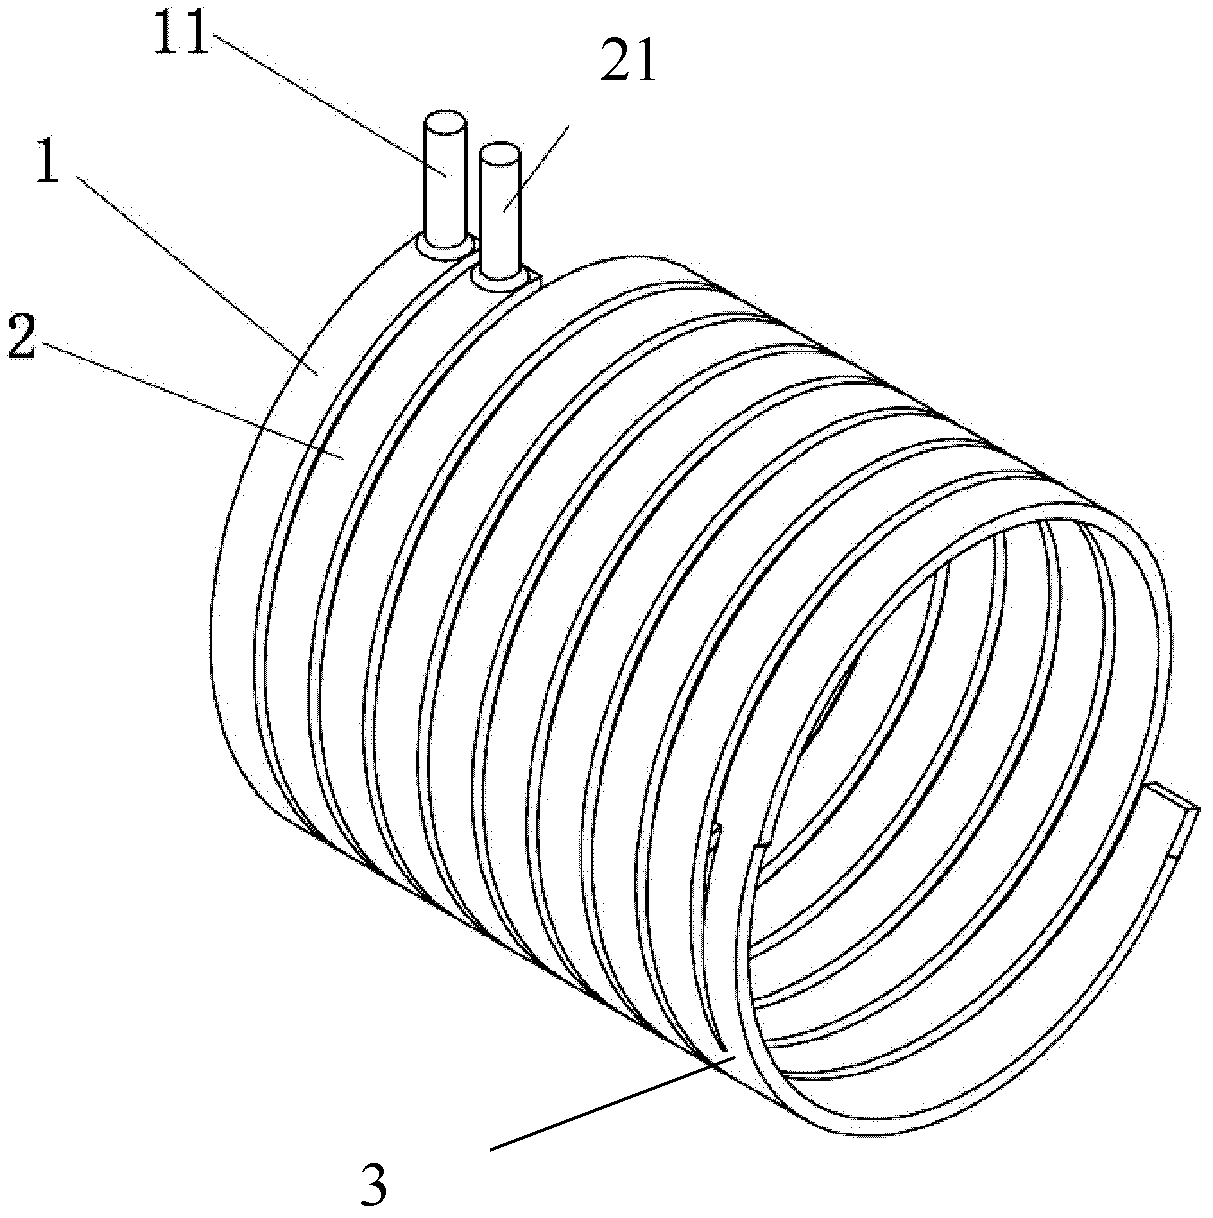 Spiral and axial circulating cooling water channel structure for motor